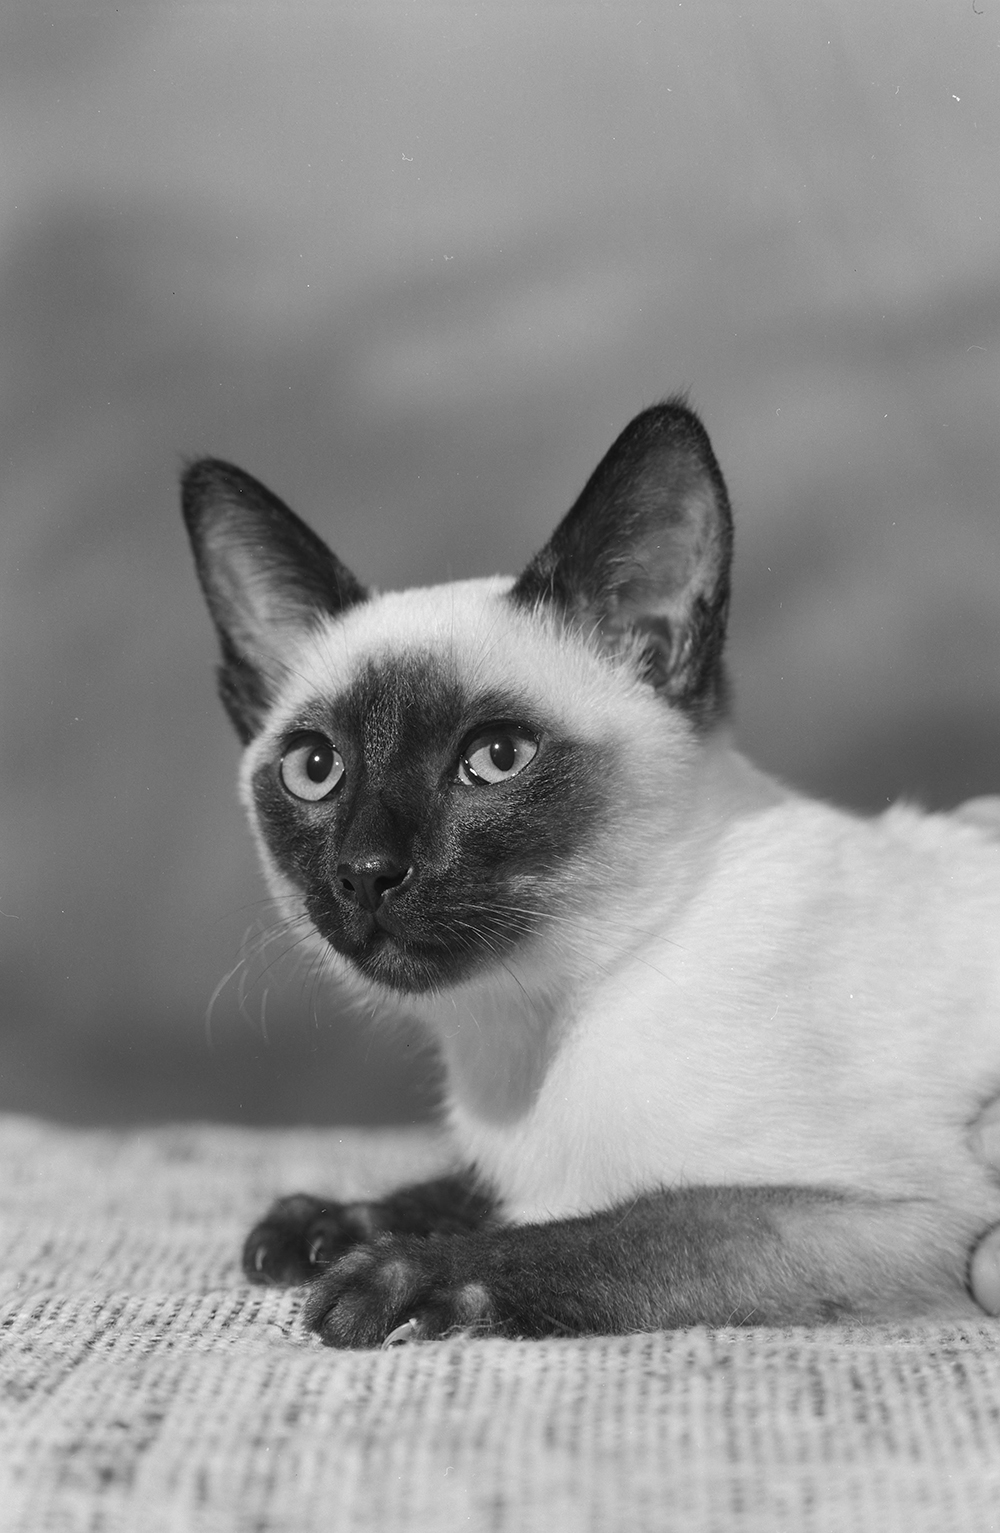 A black and white close up of the head and front paws of a siamese cat with dark ears, face, and paws, facing left.